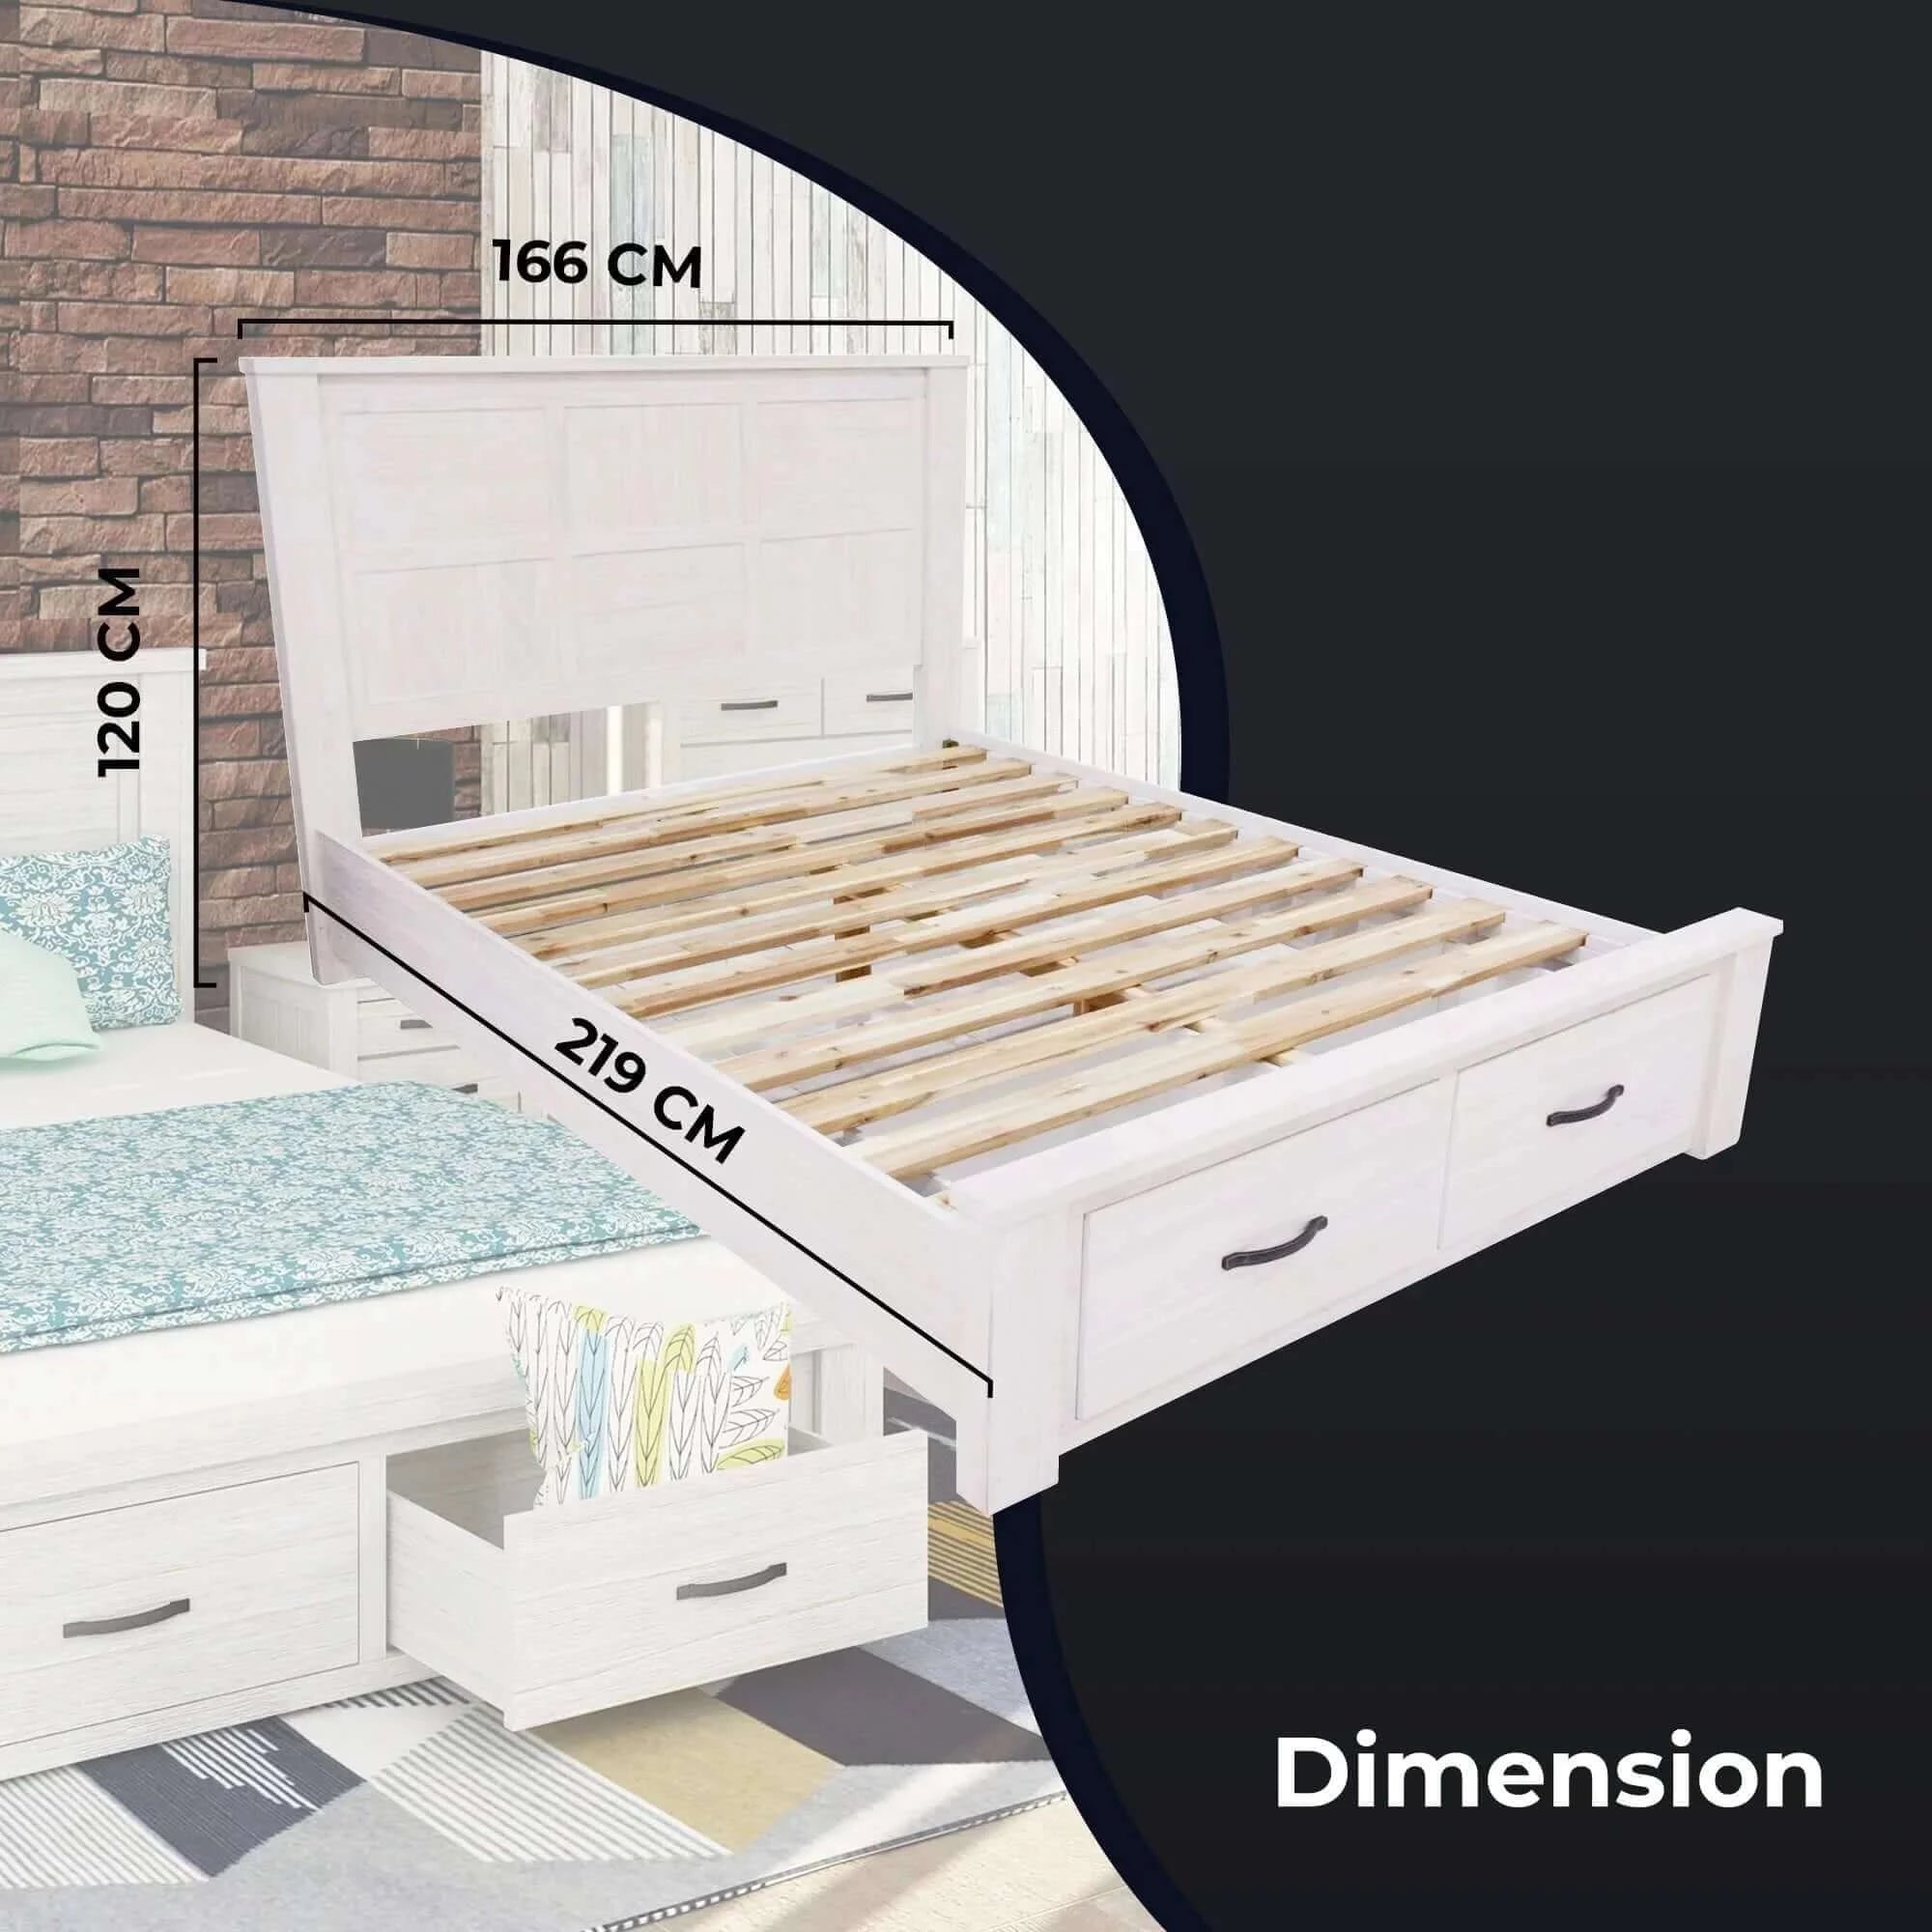 Buy foxglove bed frame queen size timber mattress base with storage drawers - white - upinteriors-Upinteriors